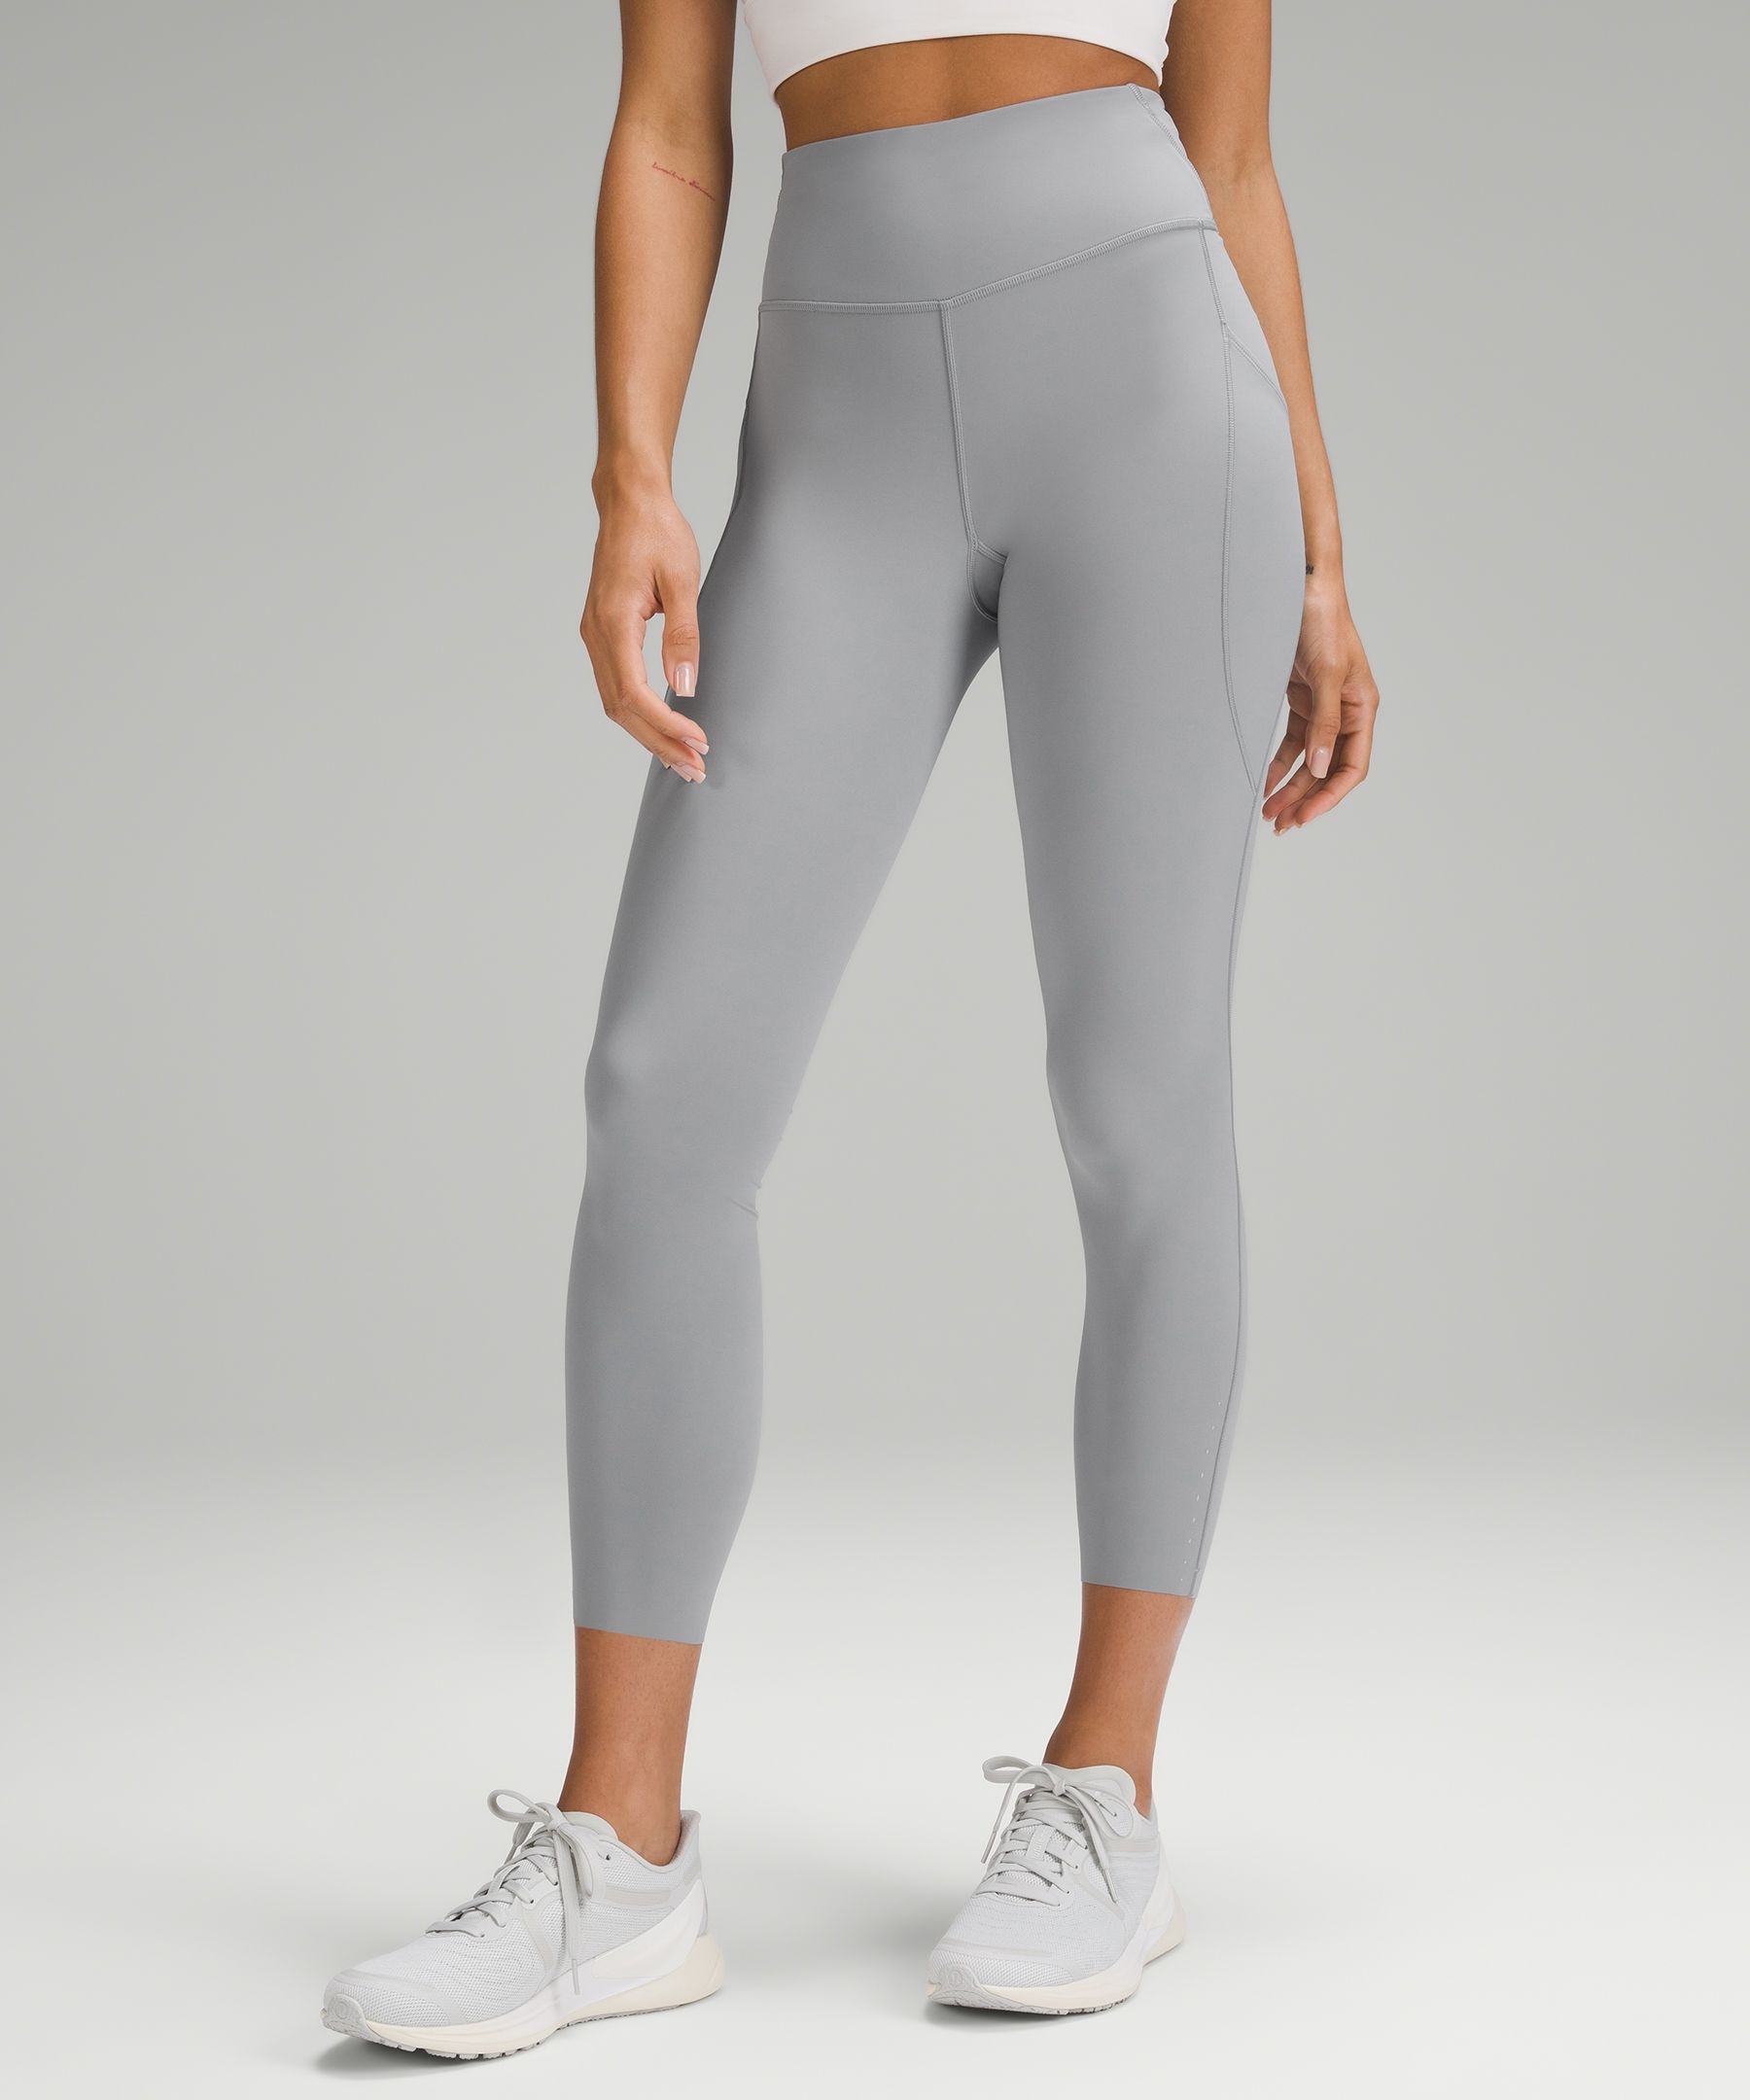 Patterned and Textured Lululemon Leggings with Side Zipper Pockets